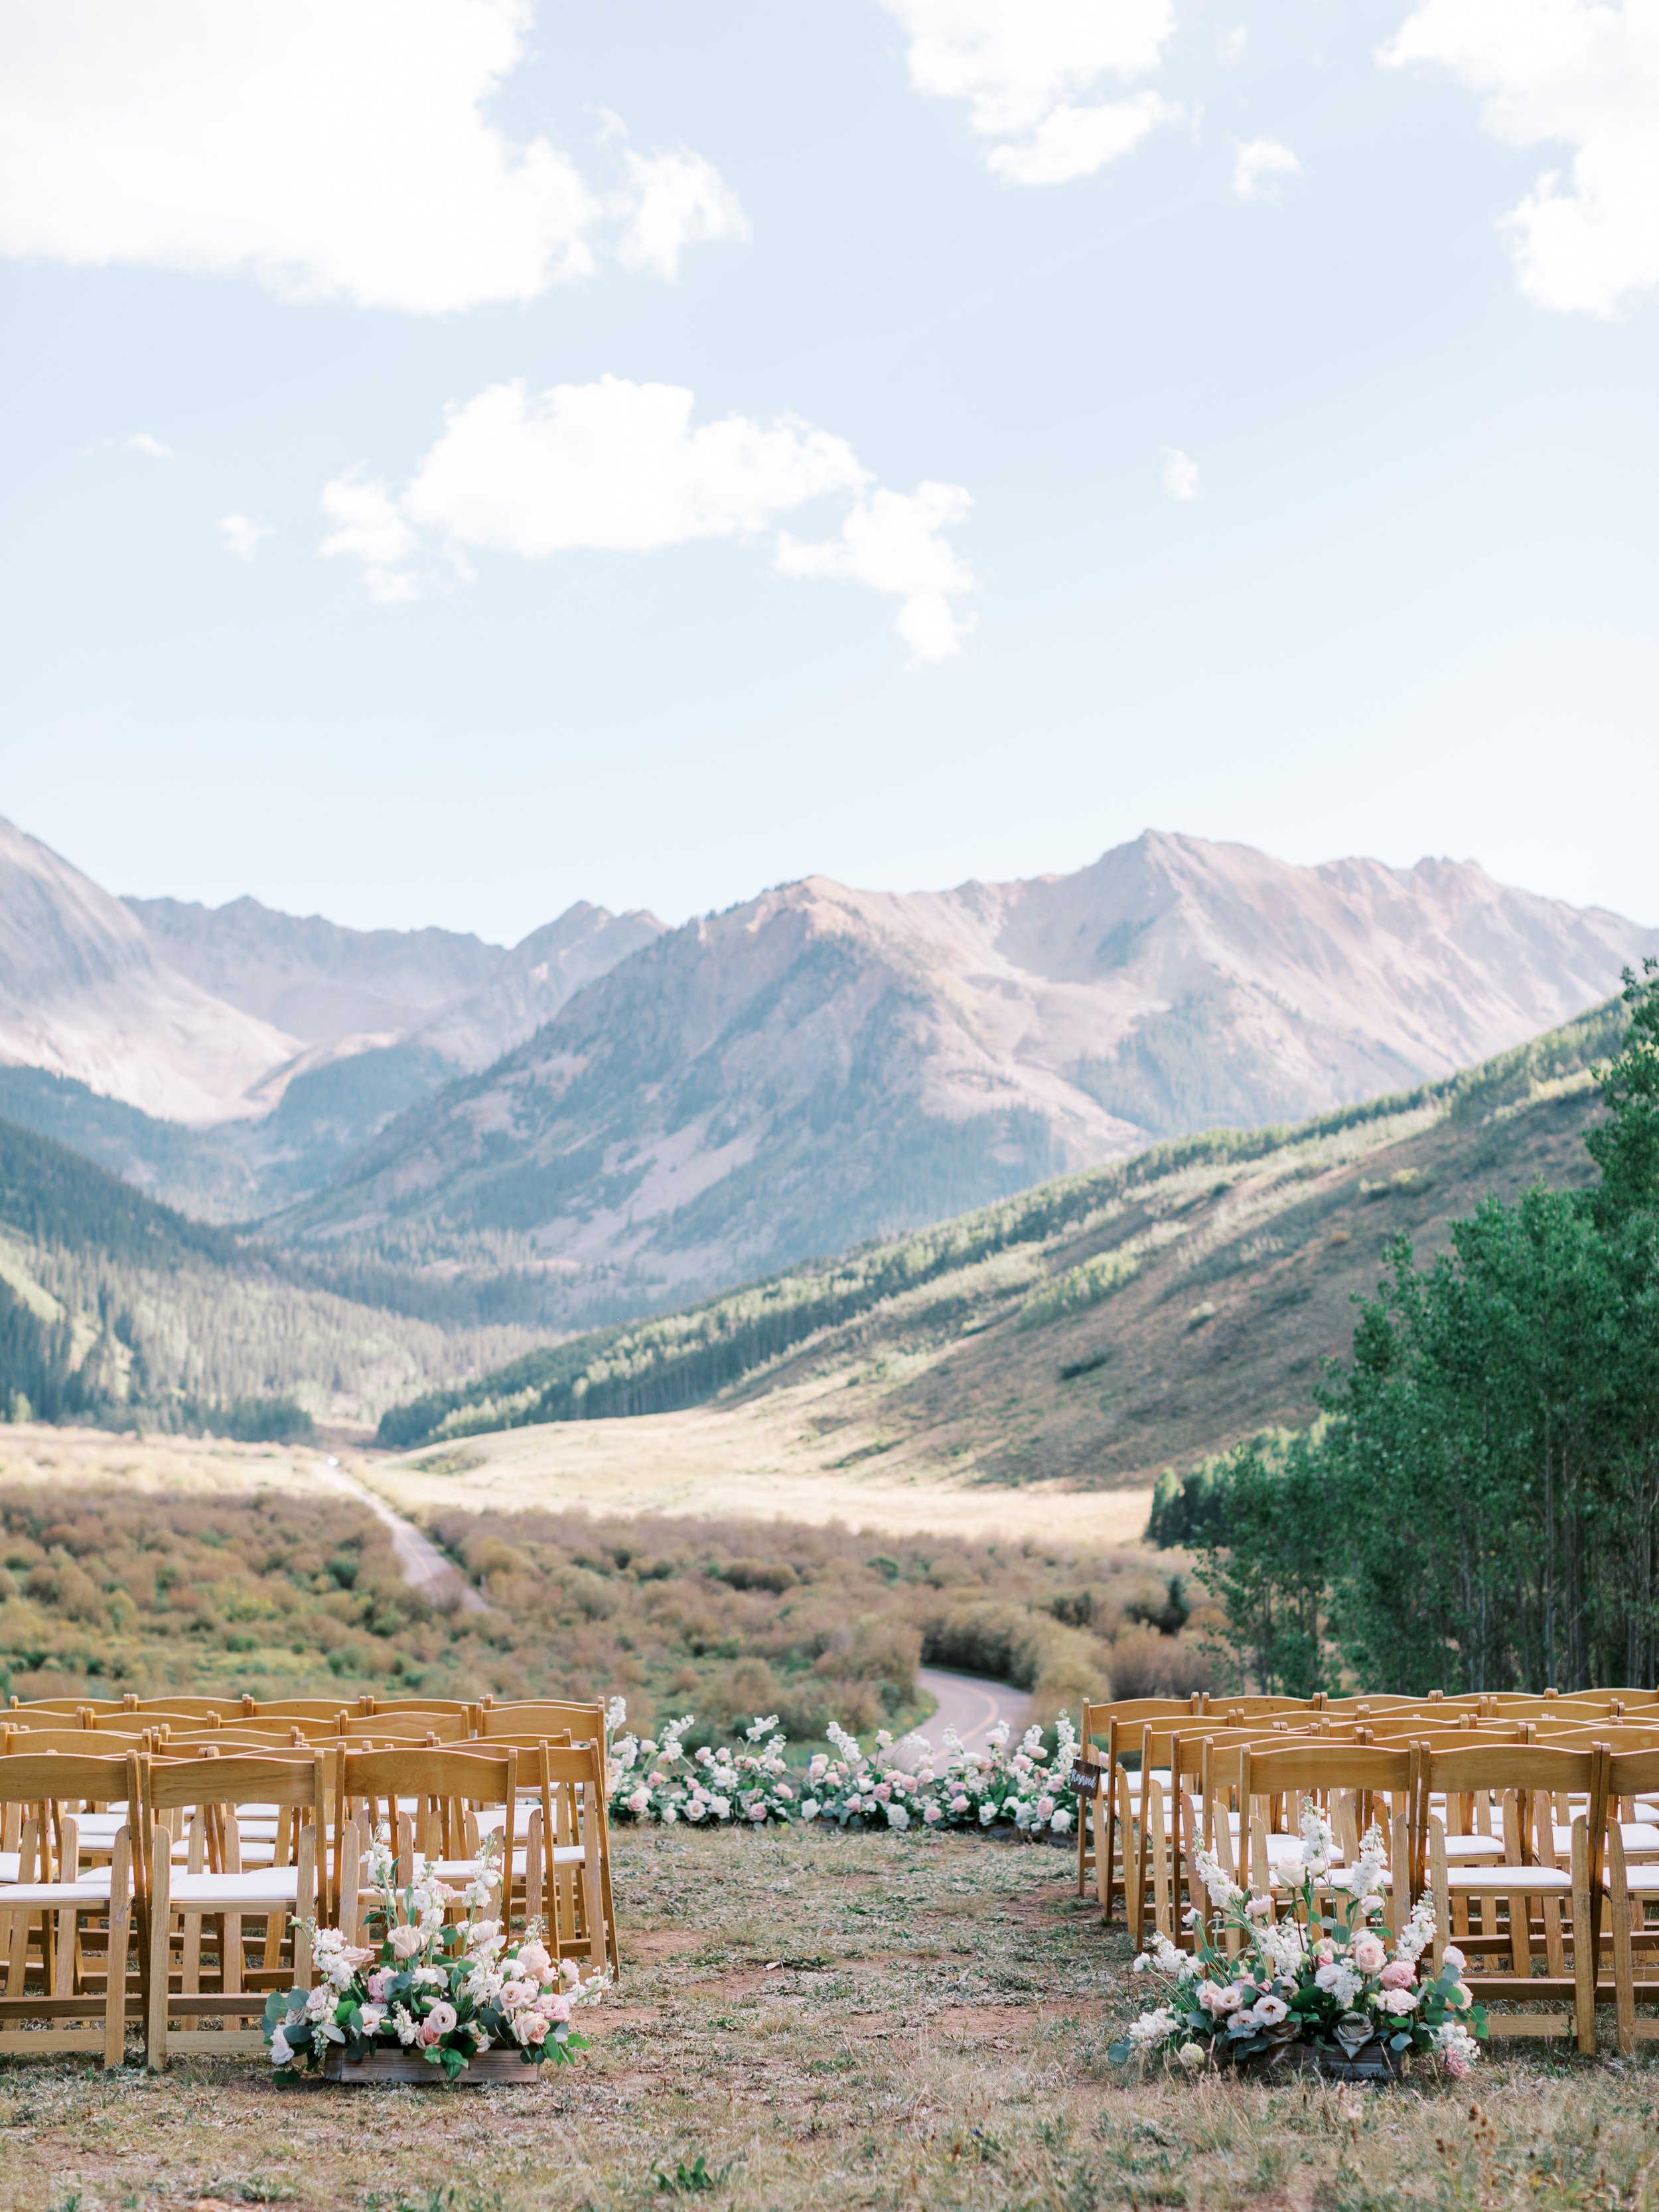 a breathtaking view of the mountains in this outdoor ceremony venue in aspen colorado.